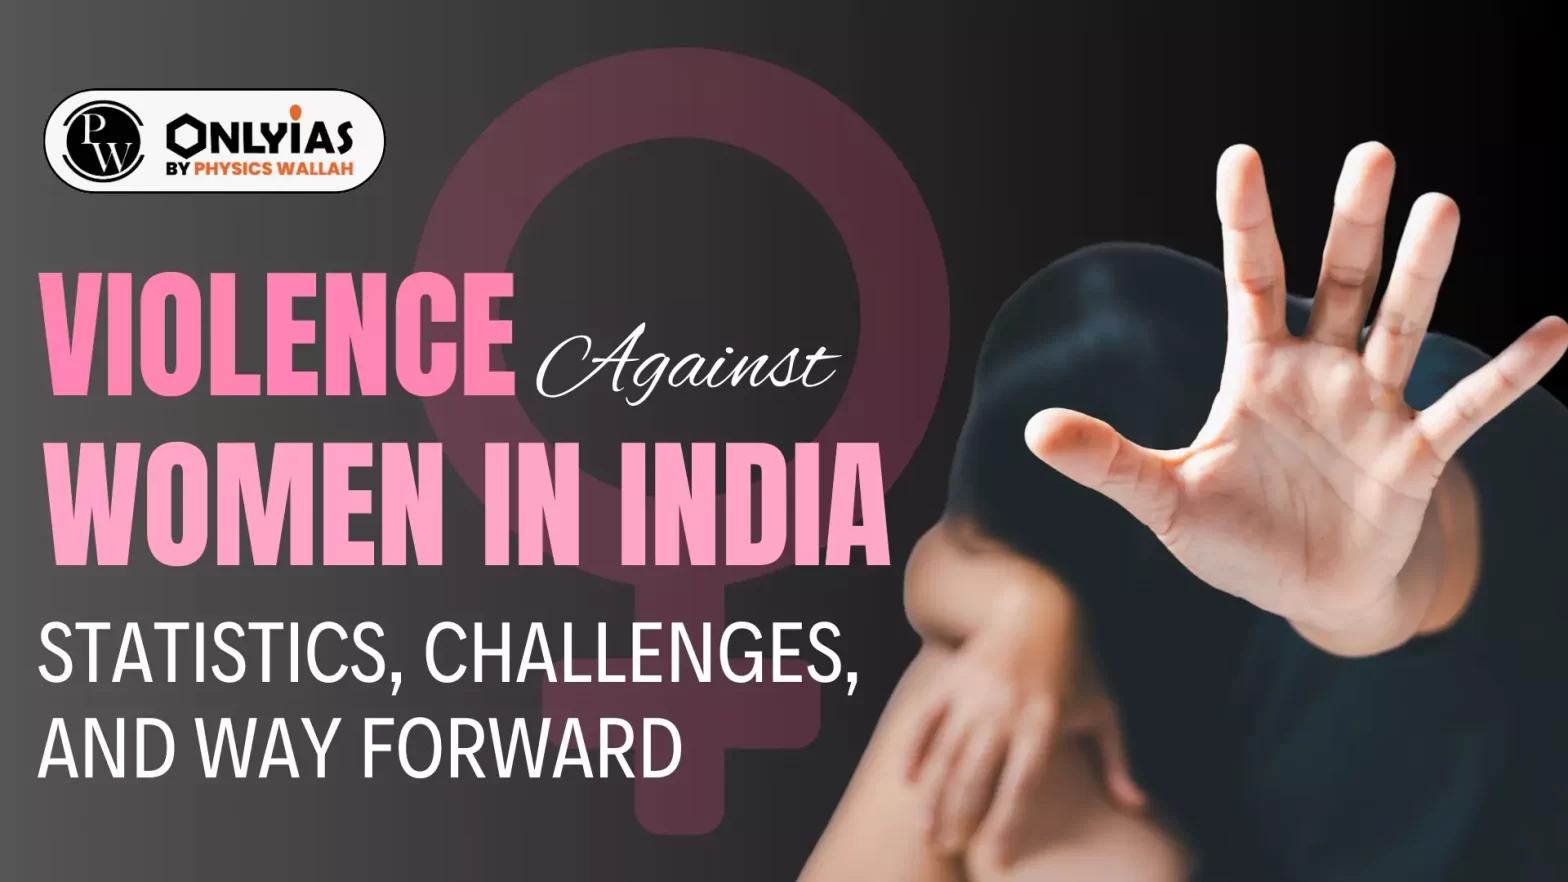 Violence Against Women in India: Statistics, Challenges, and Way Forward